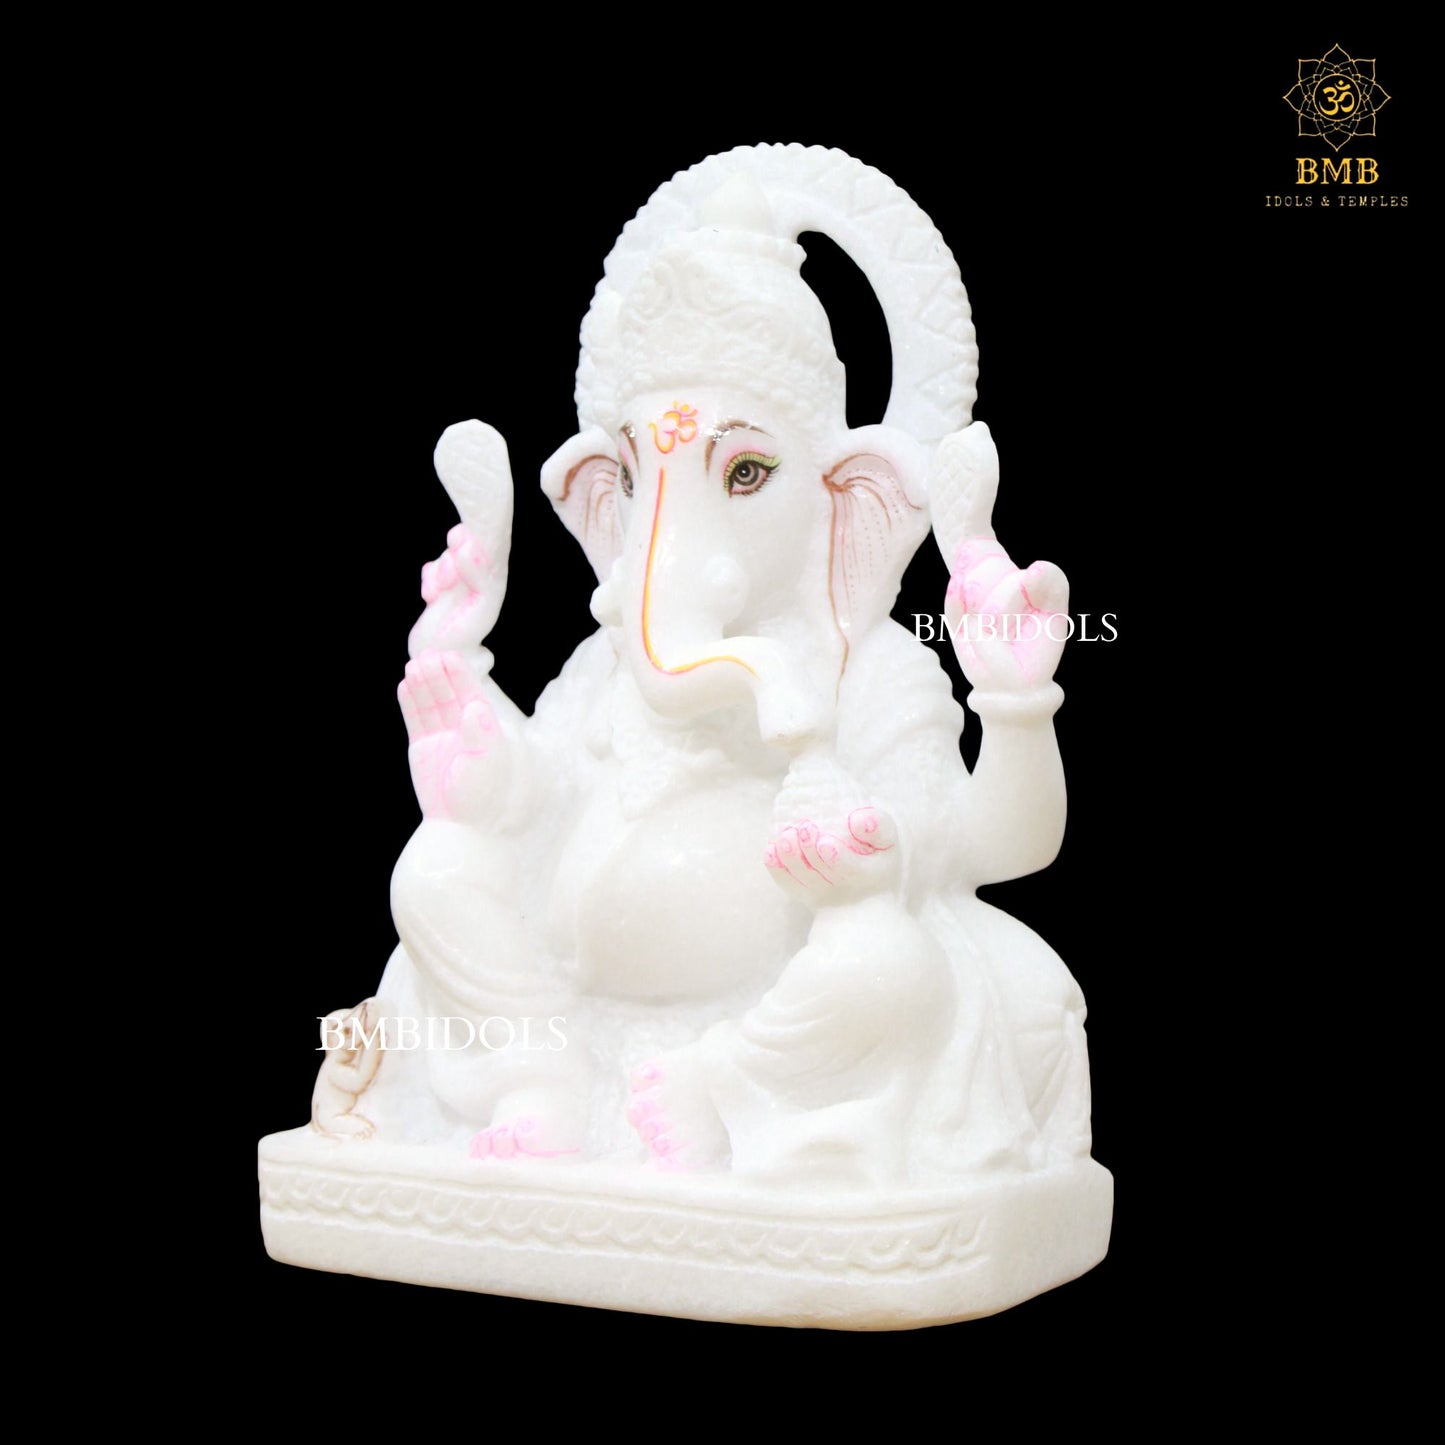 White Marble Ganesh Murti made in Sitting Posture in 9inch